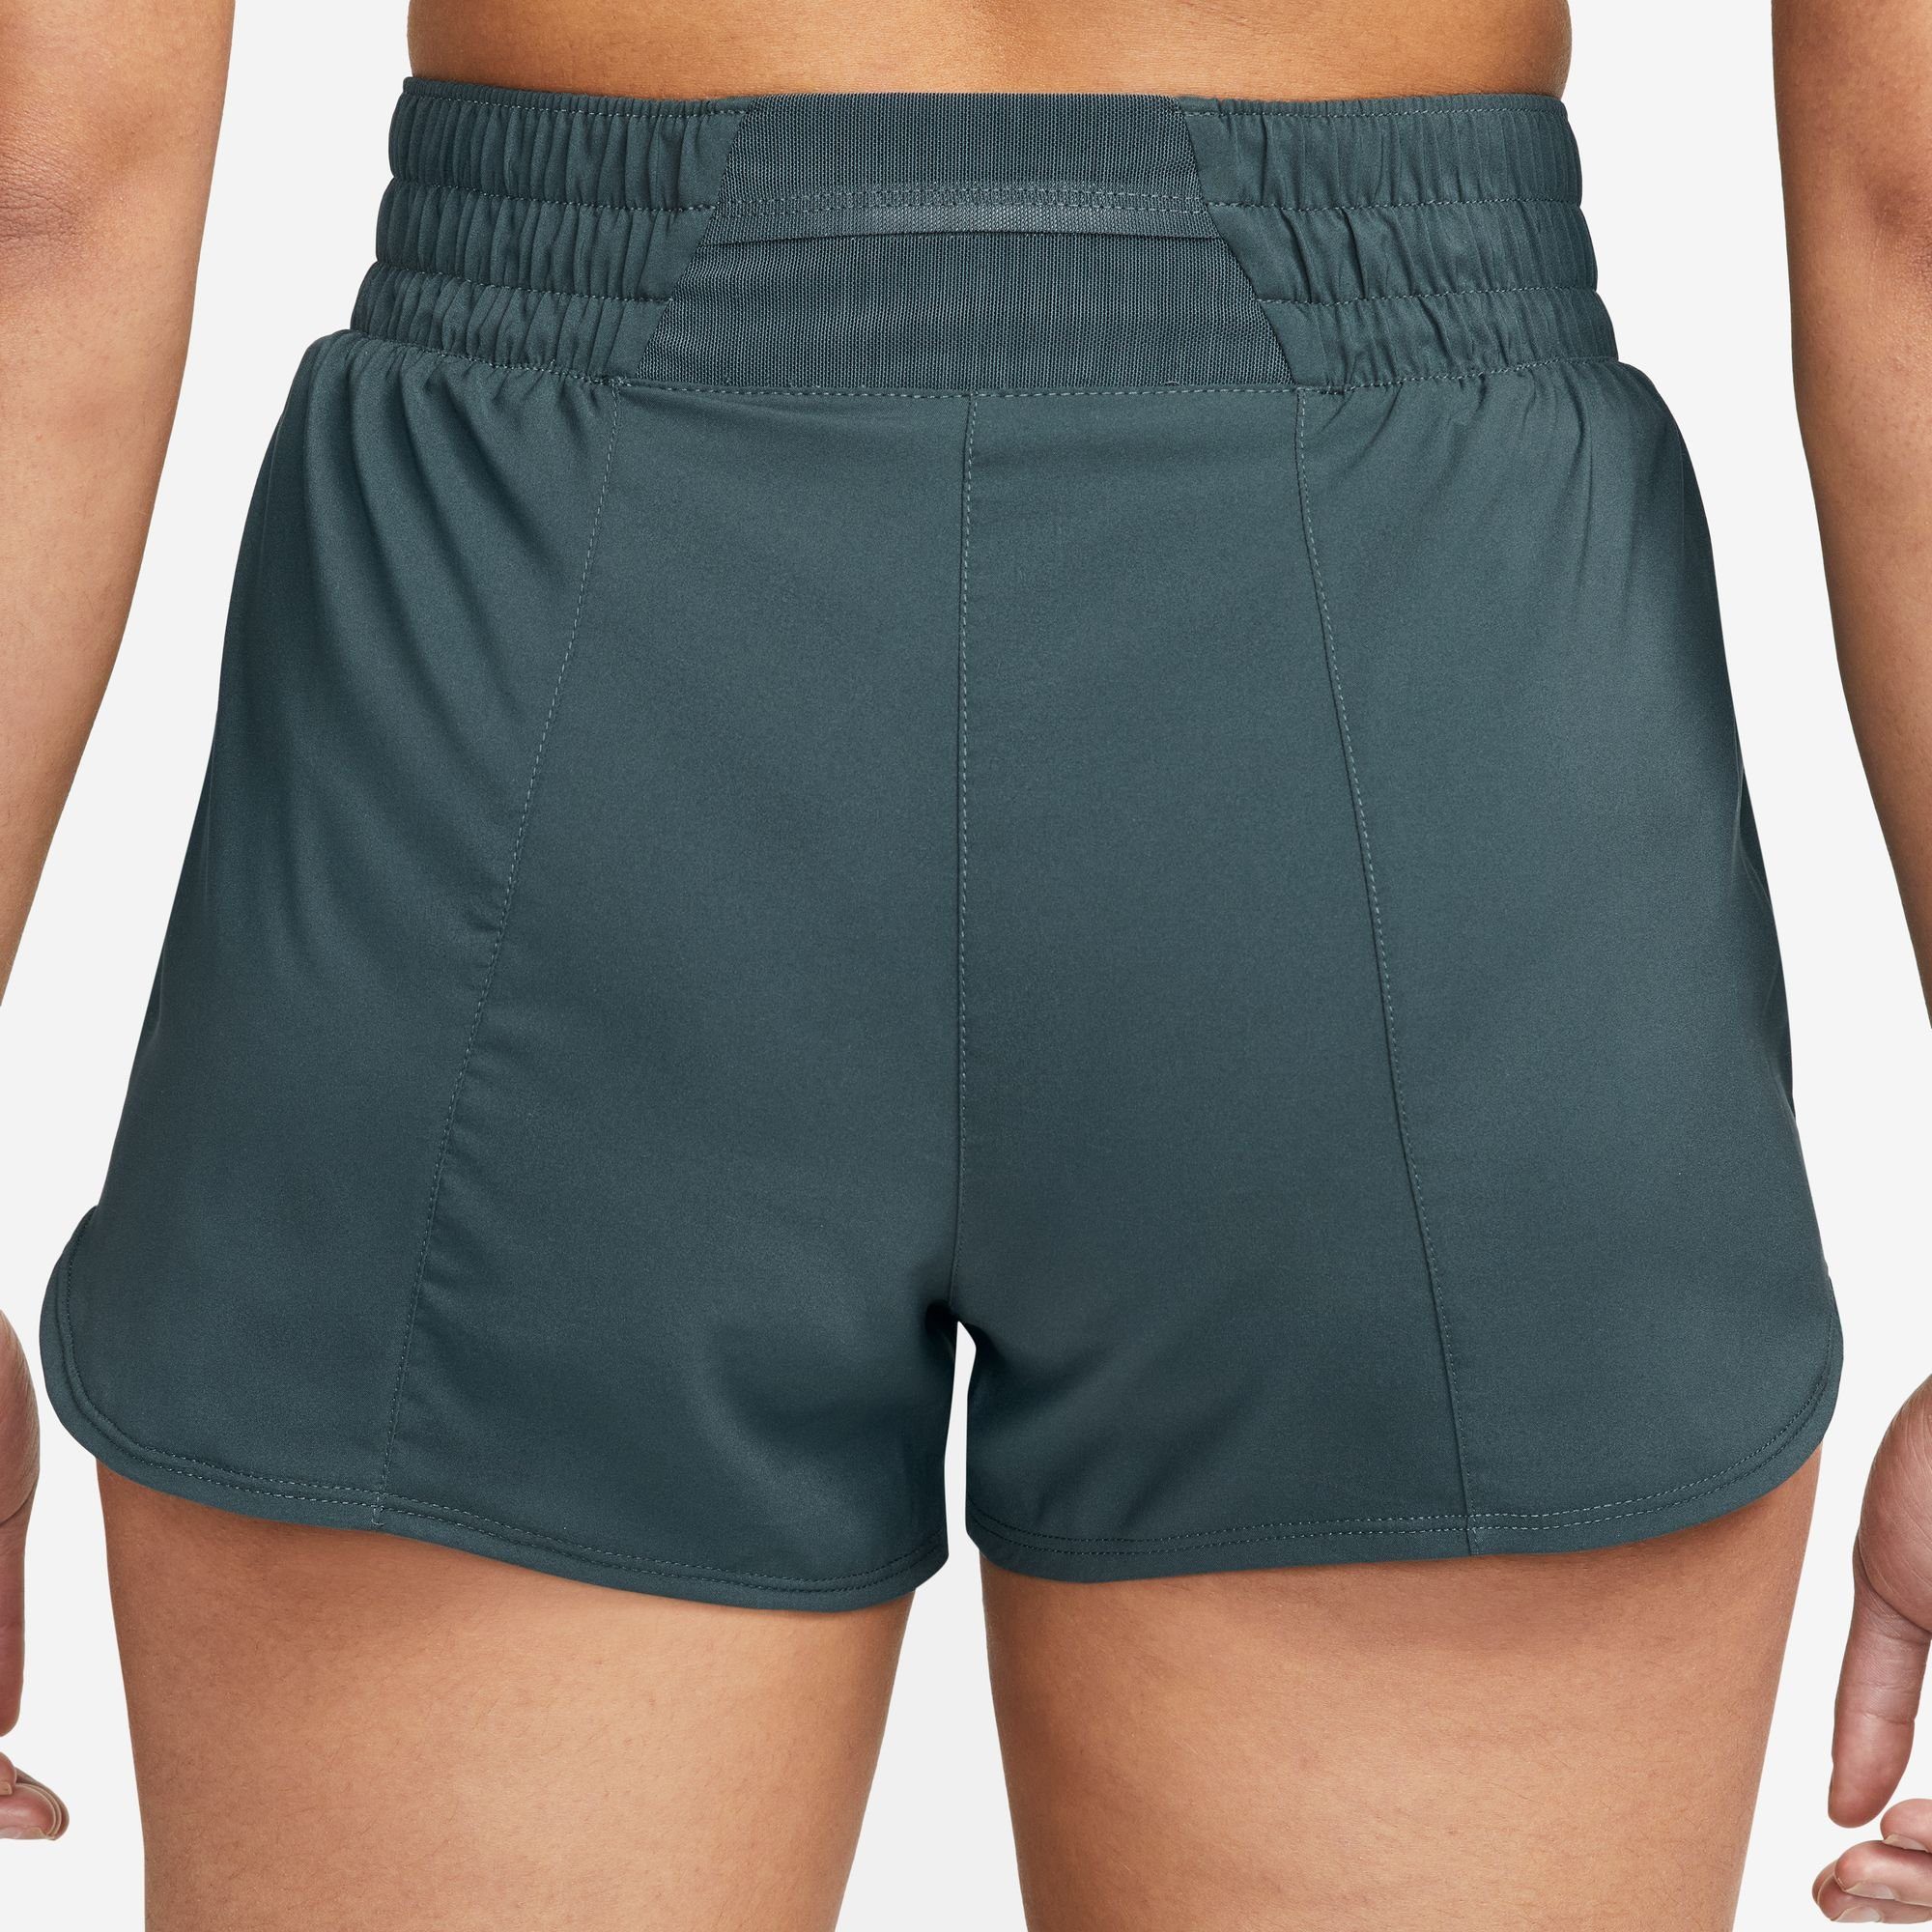 Nike Trainingsshorts DRI-FIT SHORTS DEEP BRIEF-LINED SILV MID-RISE ONE WOMEN'S JUNGLE/REFLECTIVE